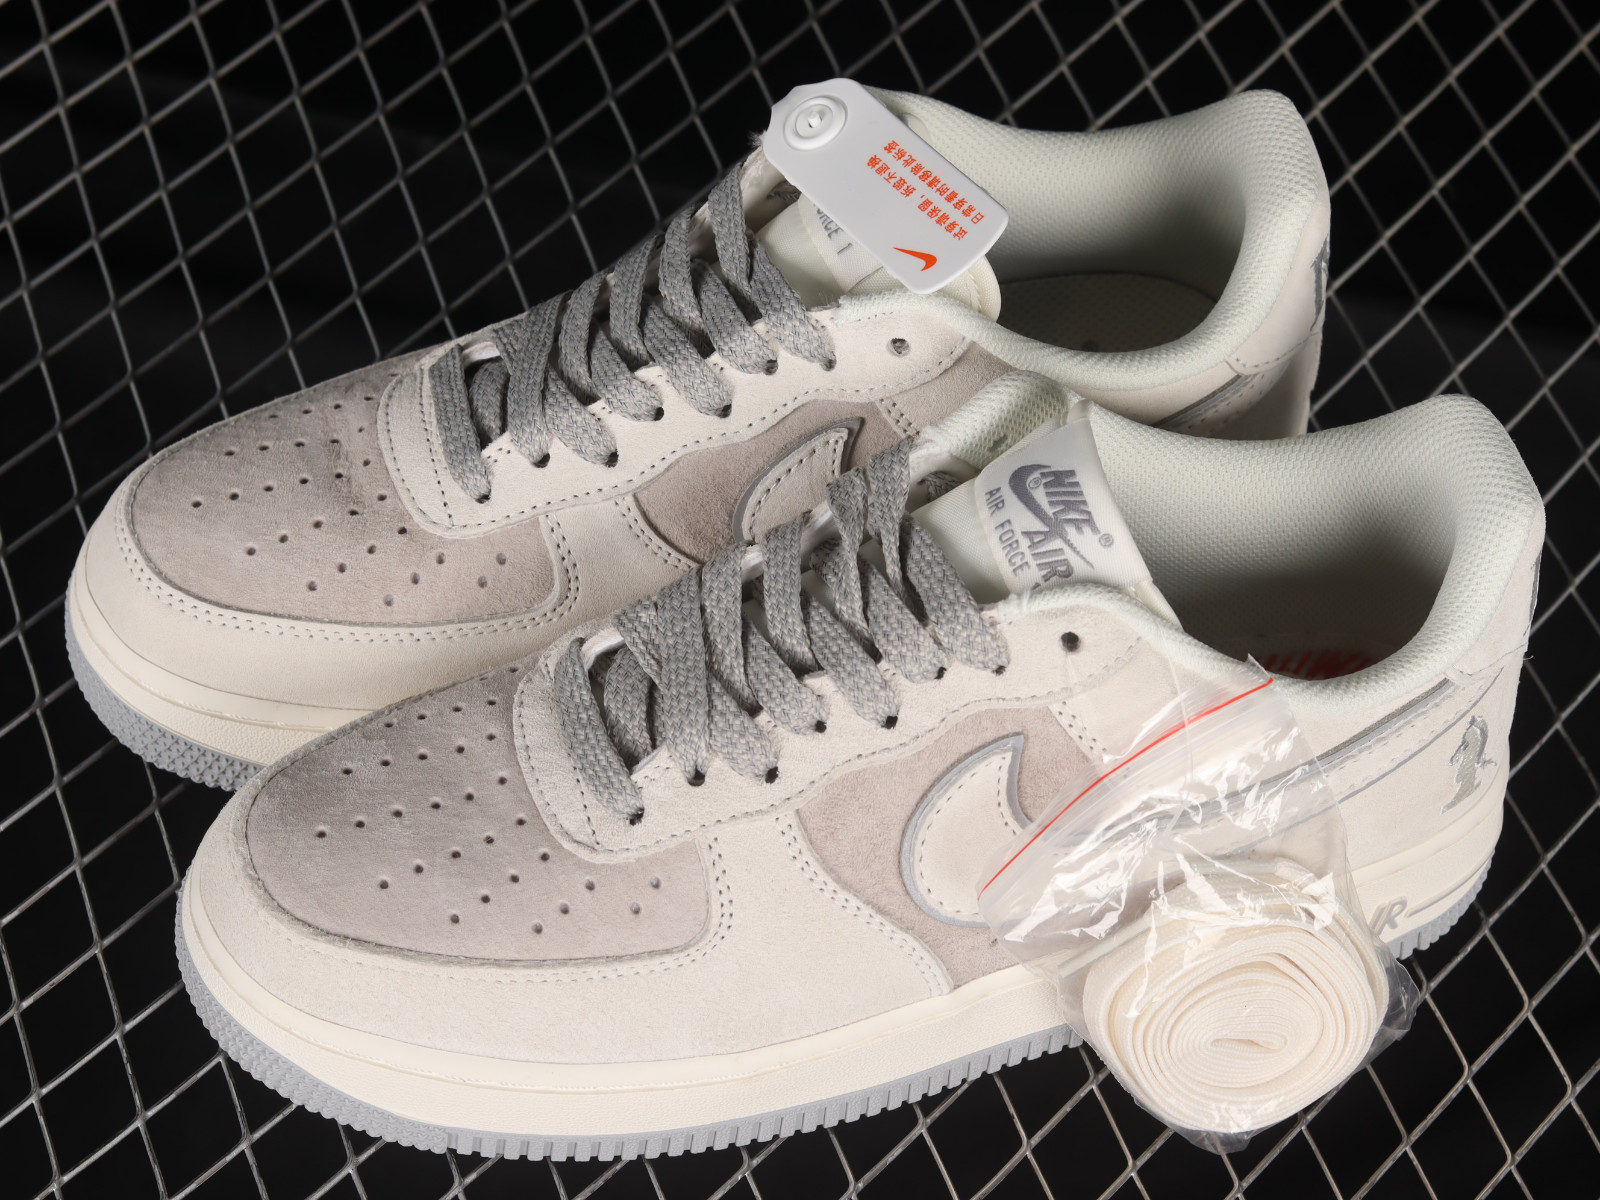 overtuigen Detector veer nike air tech challenge 2 french open schedule - MultiscaleconsultingShops  - 005 - Nike Air Force 1 07 Low Four Horsemen PE Suede Dark Grey White  DZ3696